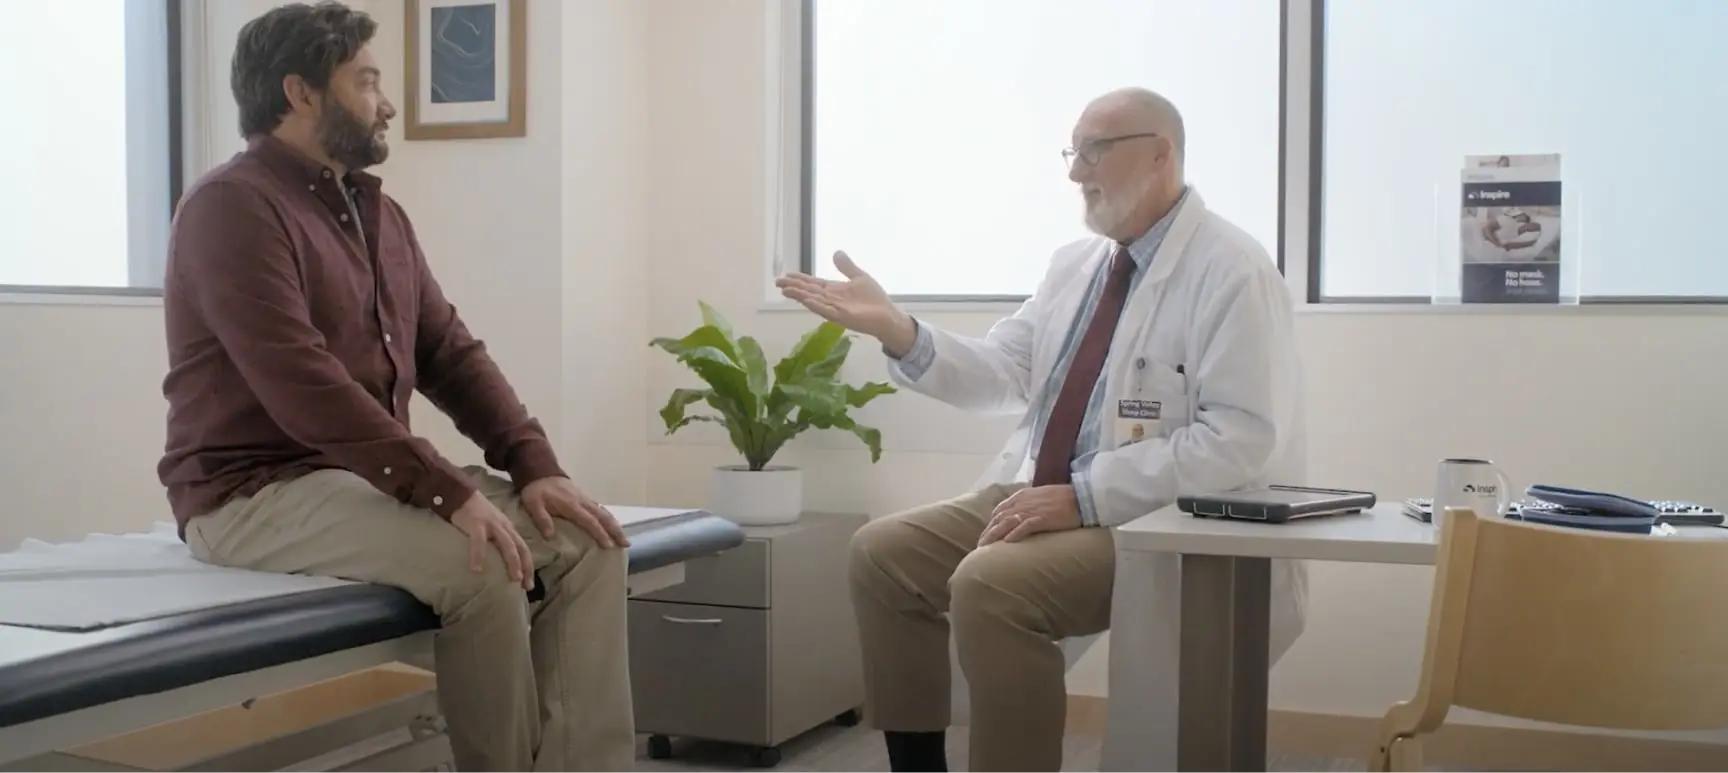 The image shows a conversation between a male patient and a male healthcare provider in a medical office.